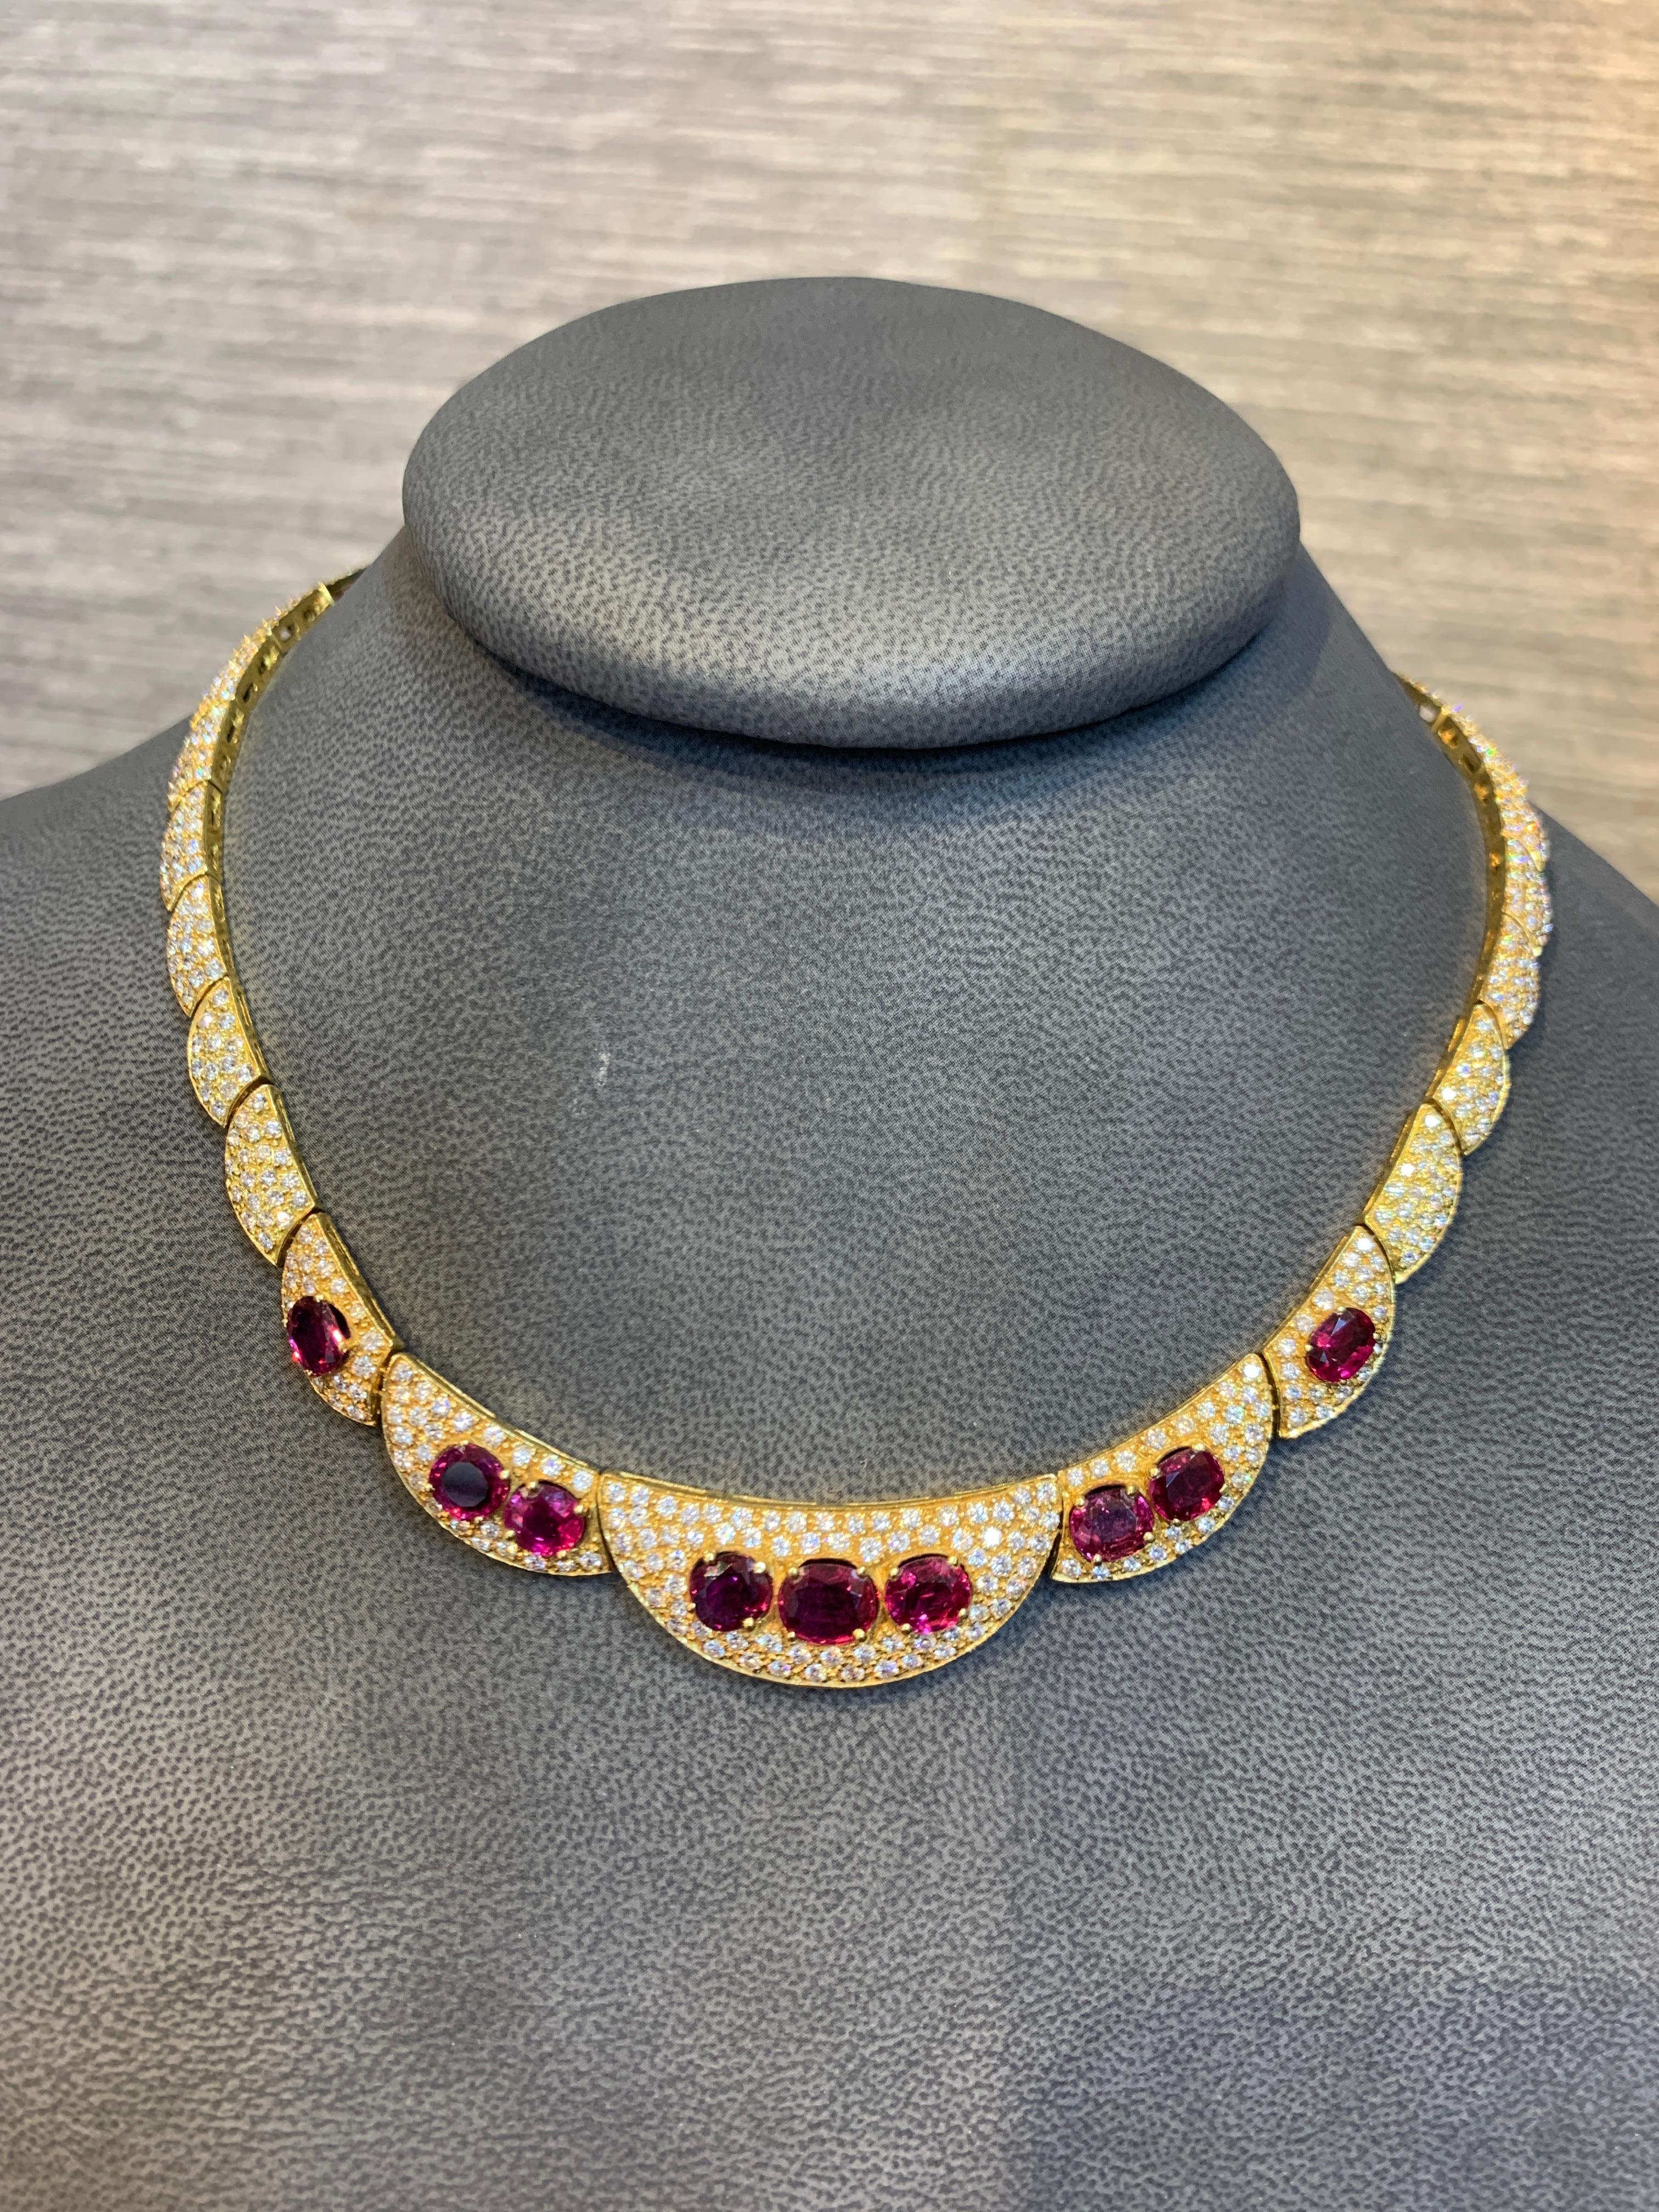 Ruby & Diamond Gold Necklace, Pave set Diamonds with 9 Oval Cut Ruby stones set in four prongs.
Approx Length: 16